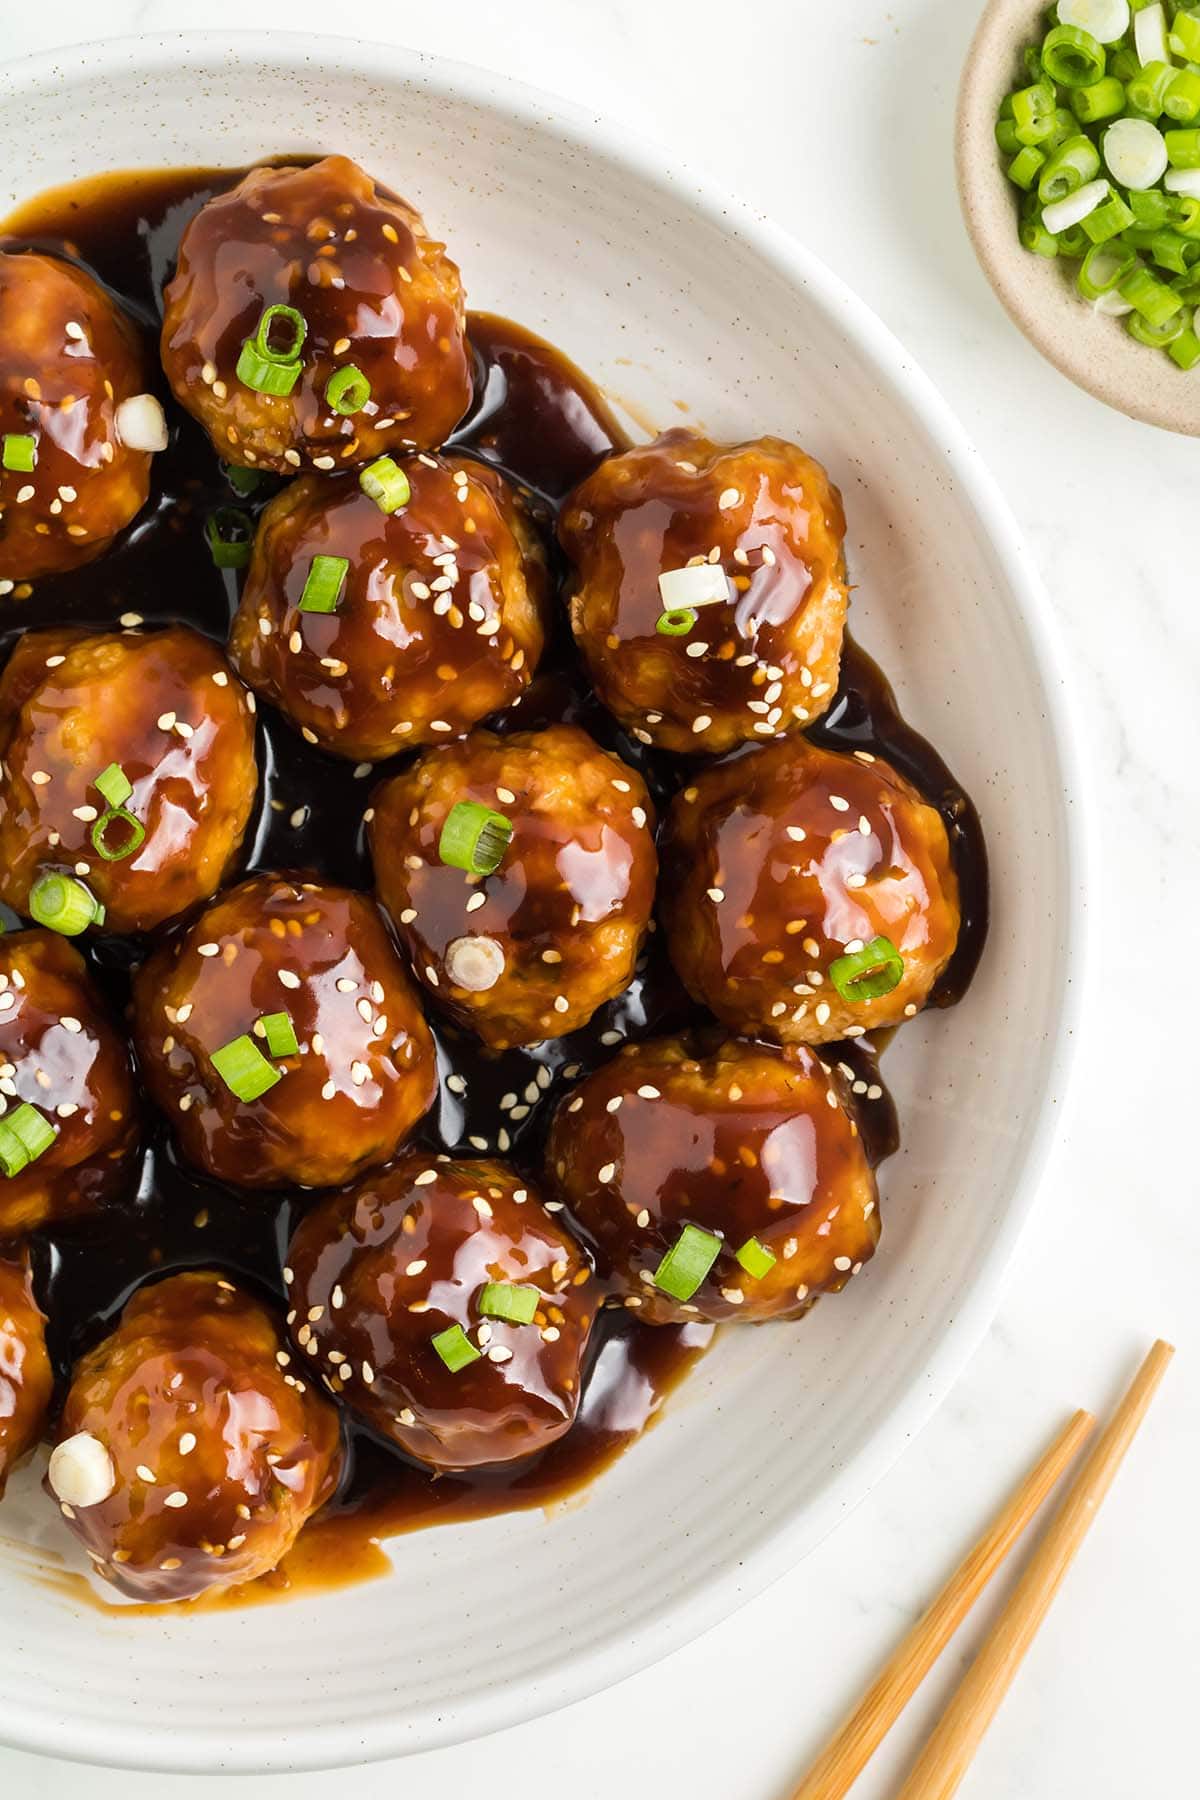 Teriyaki Meatballs garnished with sesame seeds and green onions in a large bowl.